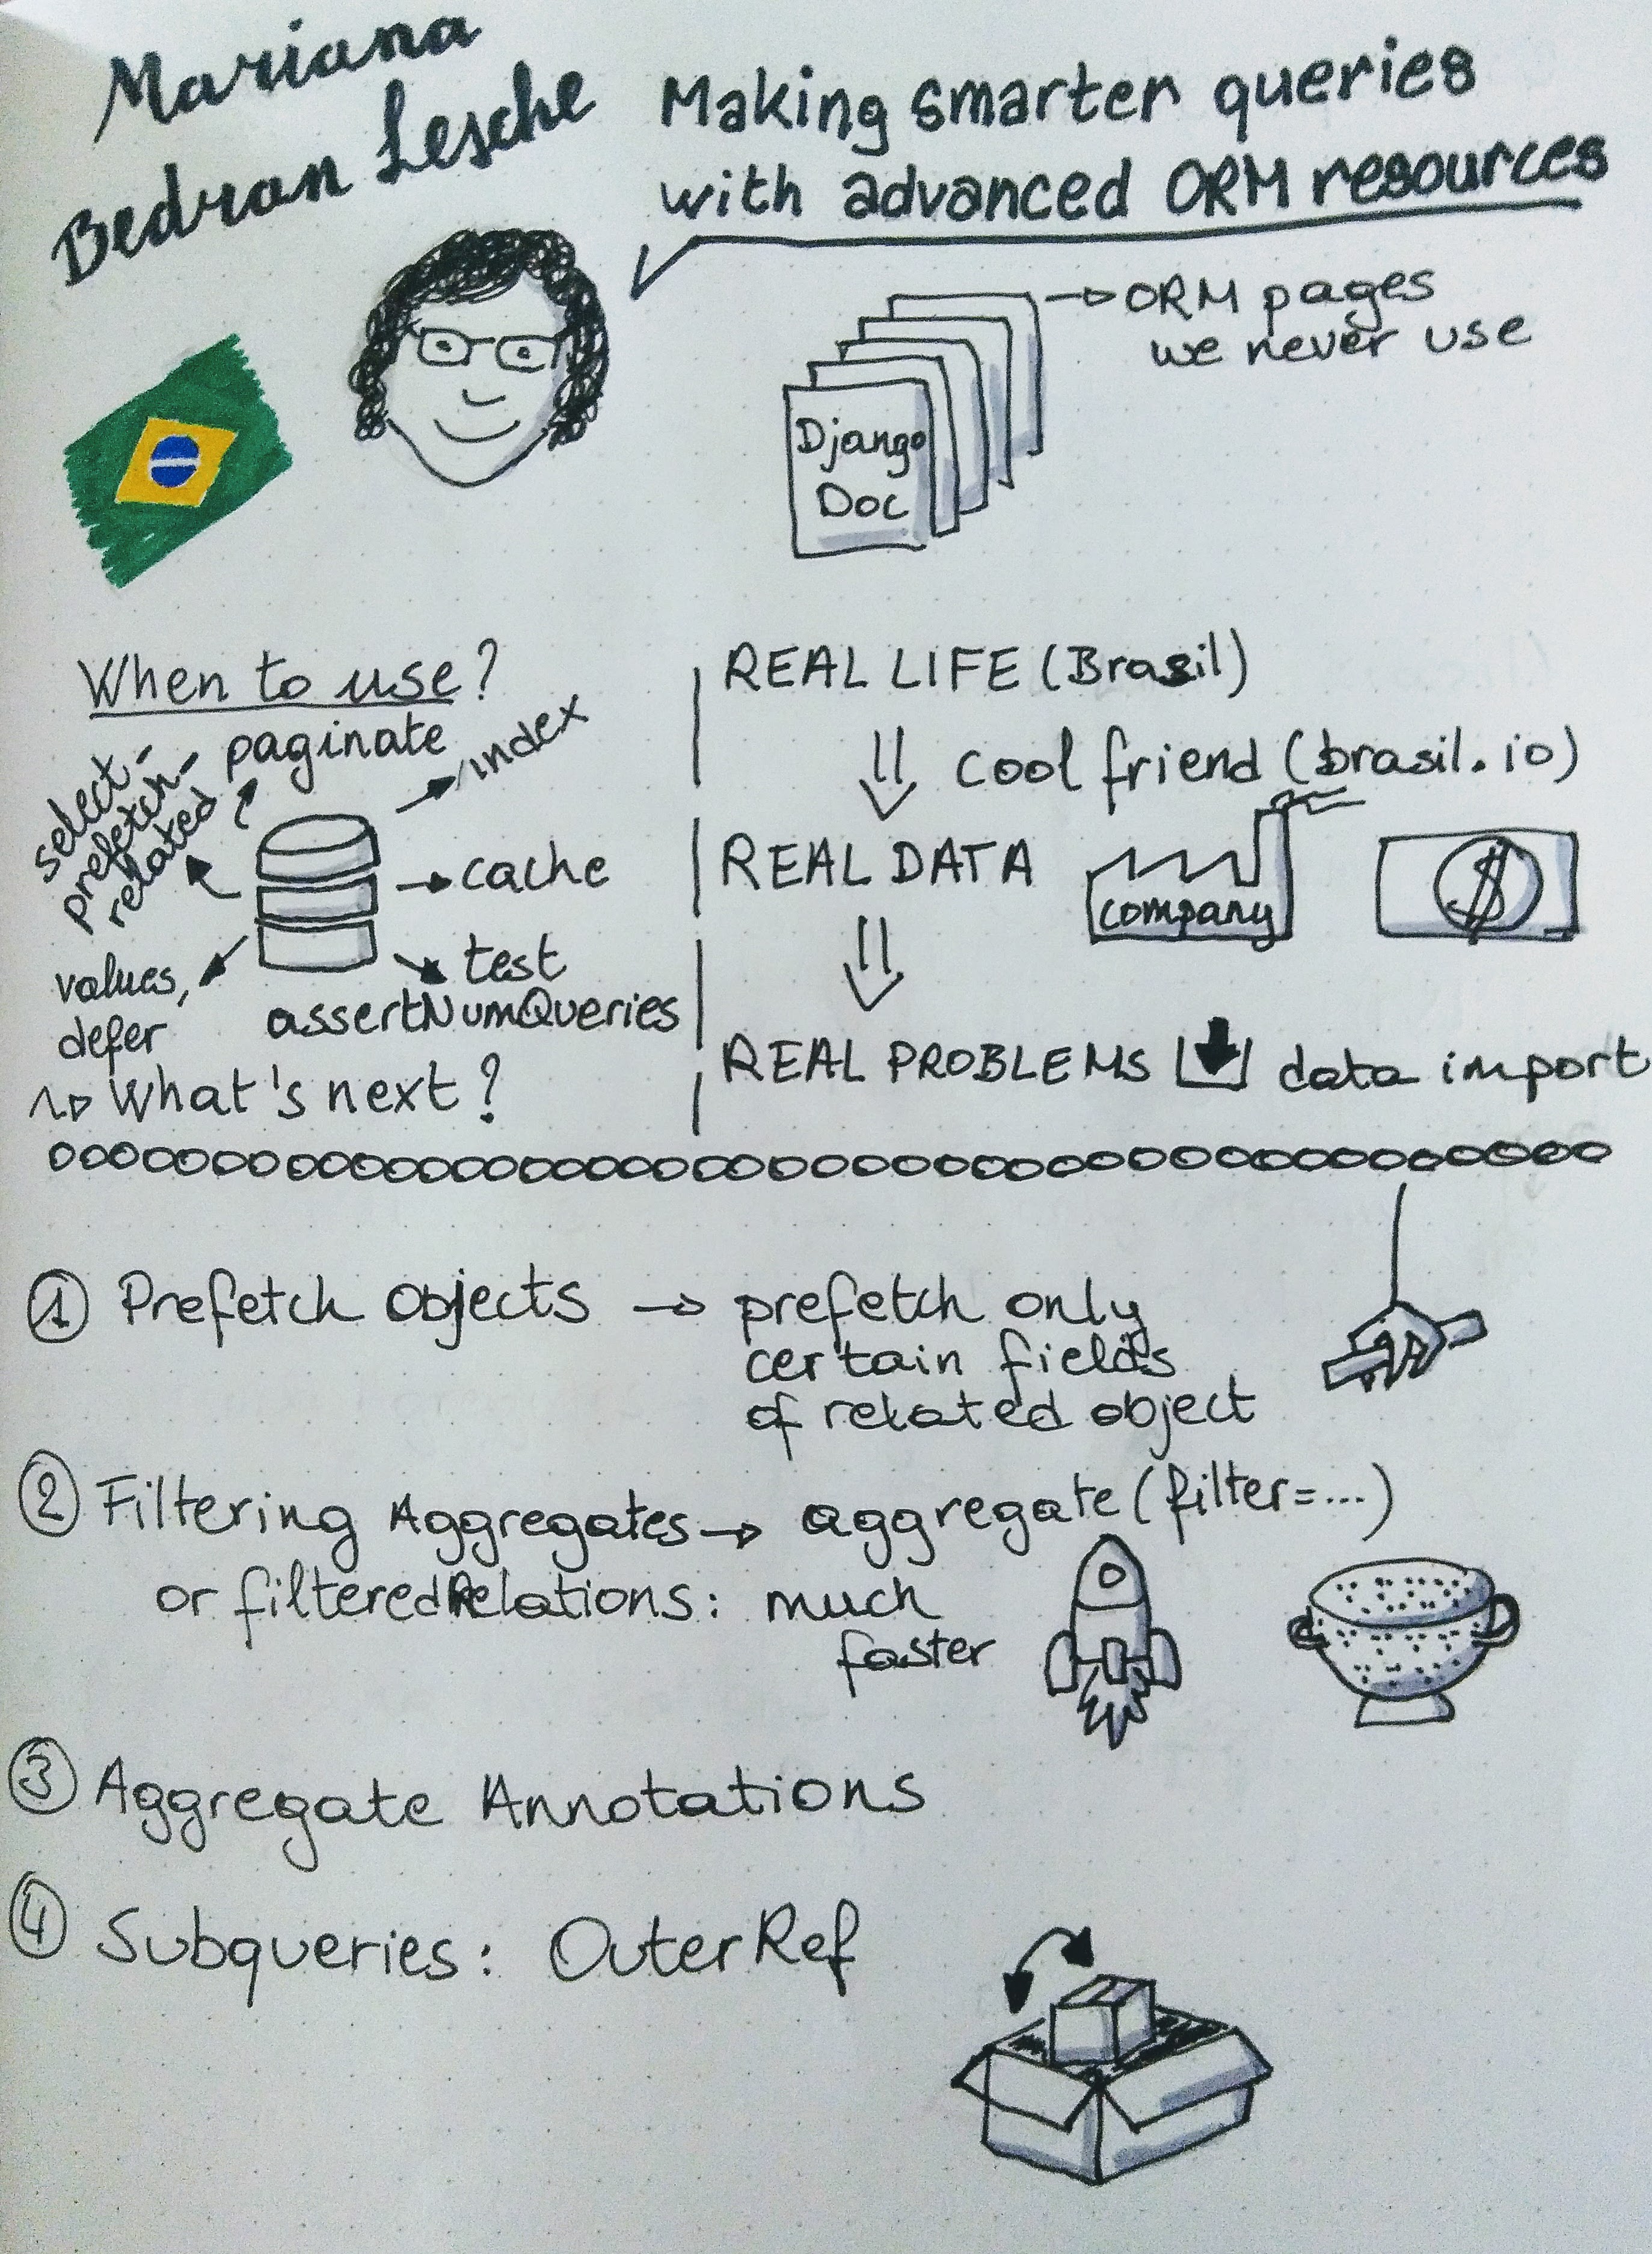 Sketchnote of Making smarter queries with advanced ORM resources